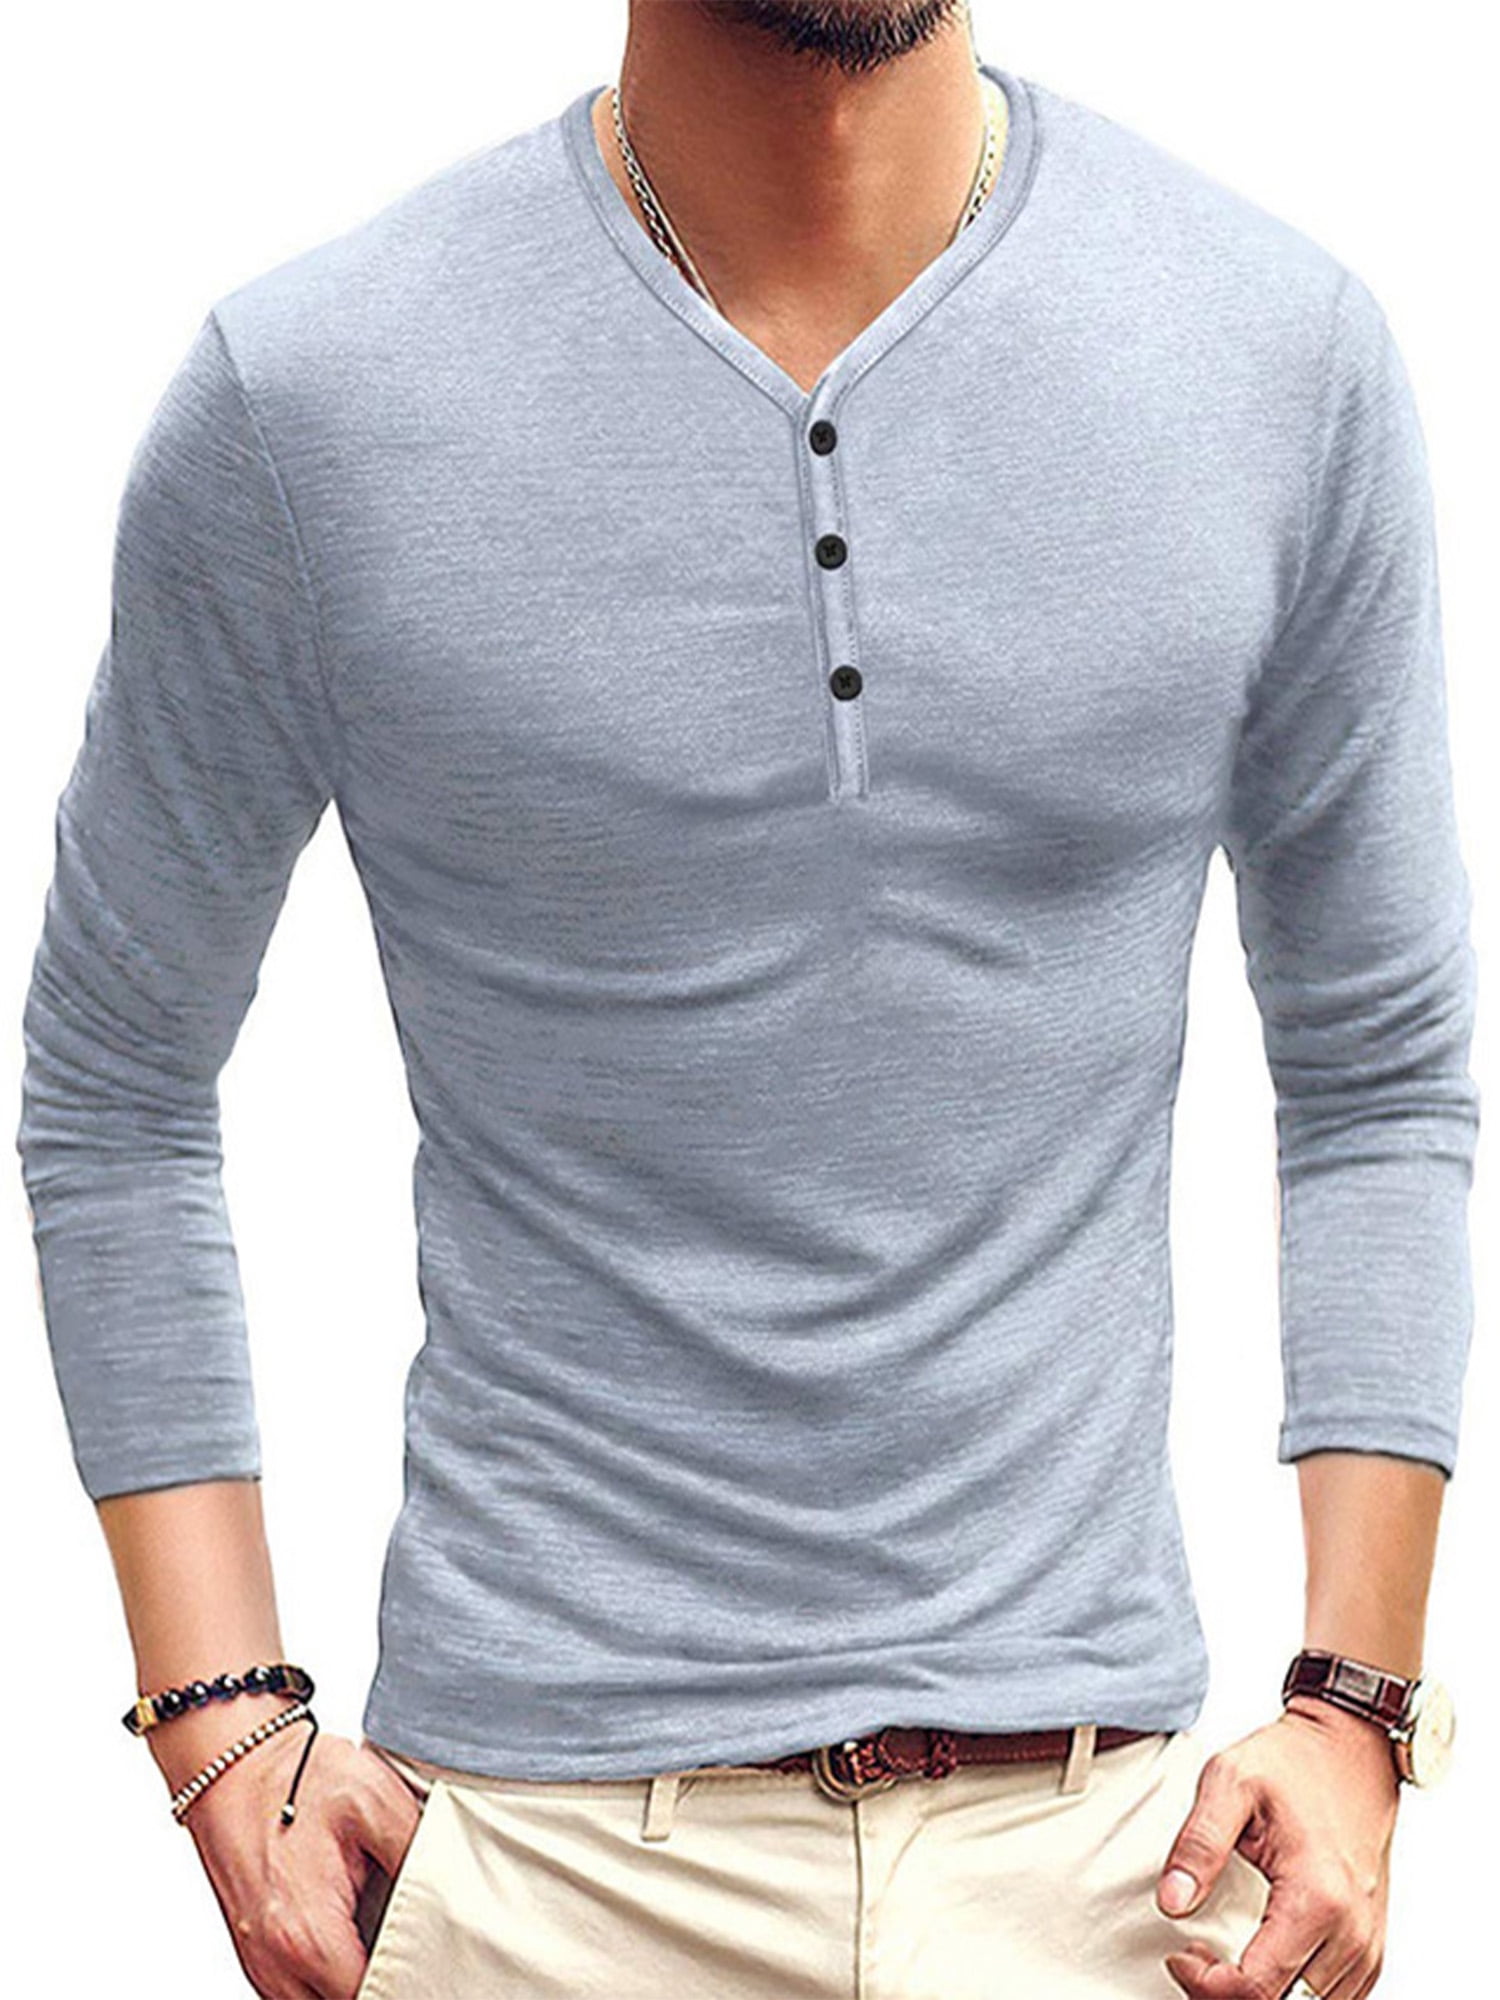 Generic Mens Casual Slim Fit Long Sleeve Henley T-Shirts Tee Top 